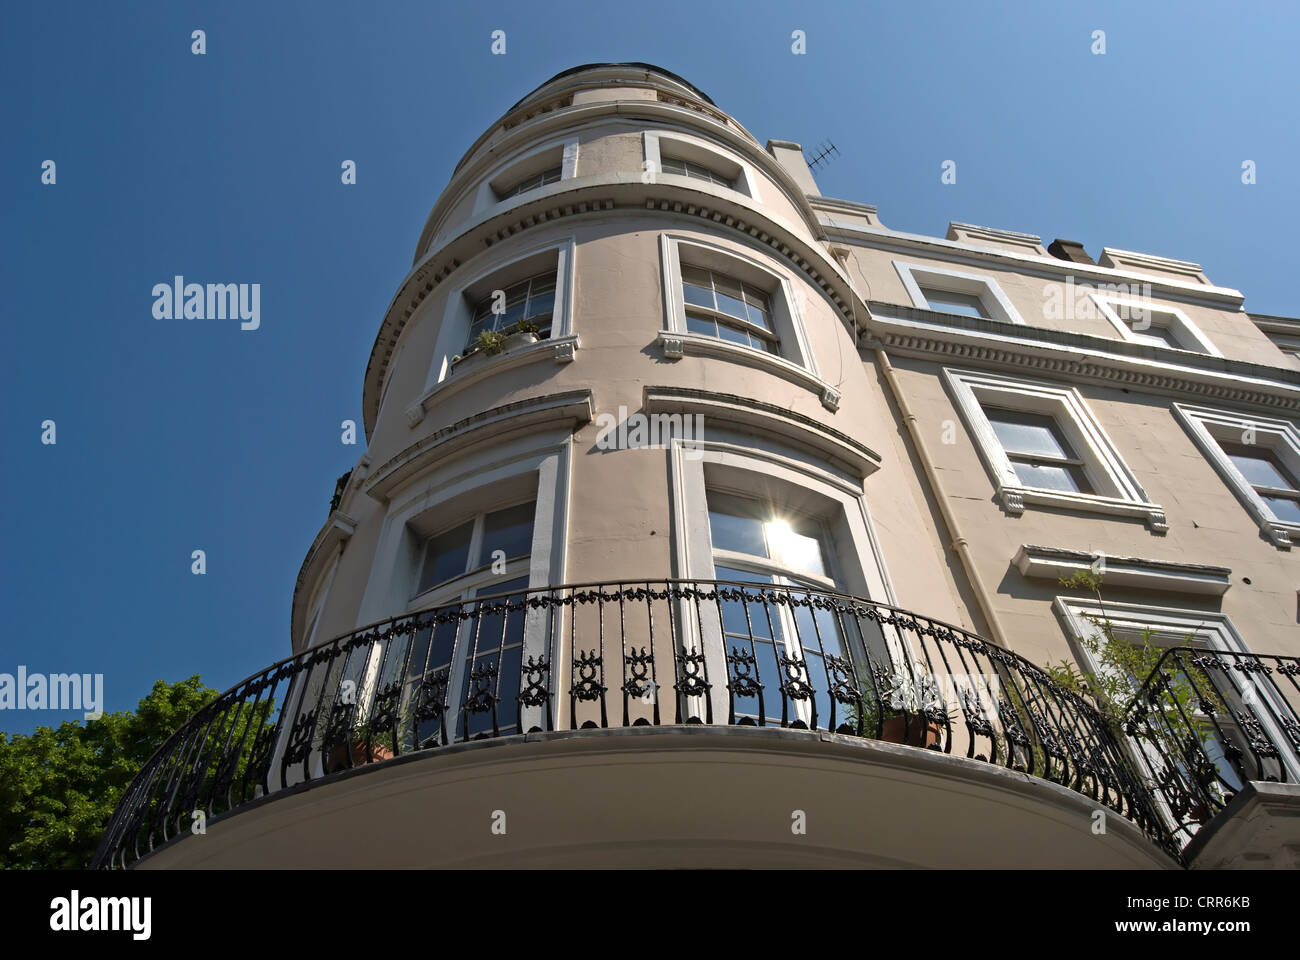 rounded corner building with balcony and sunburst in window on royal crescent, holland park, london, england Stock Photo